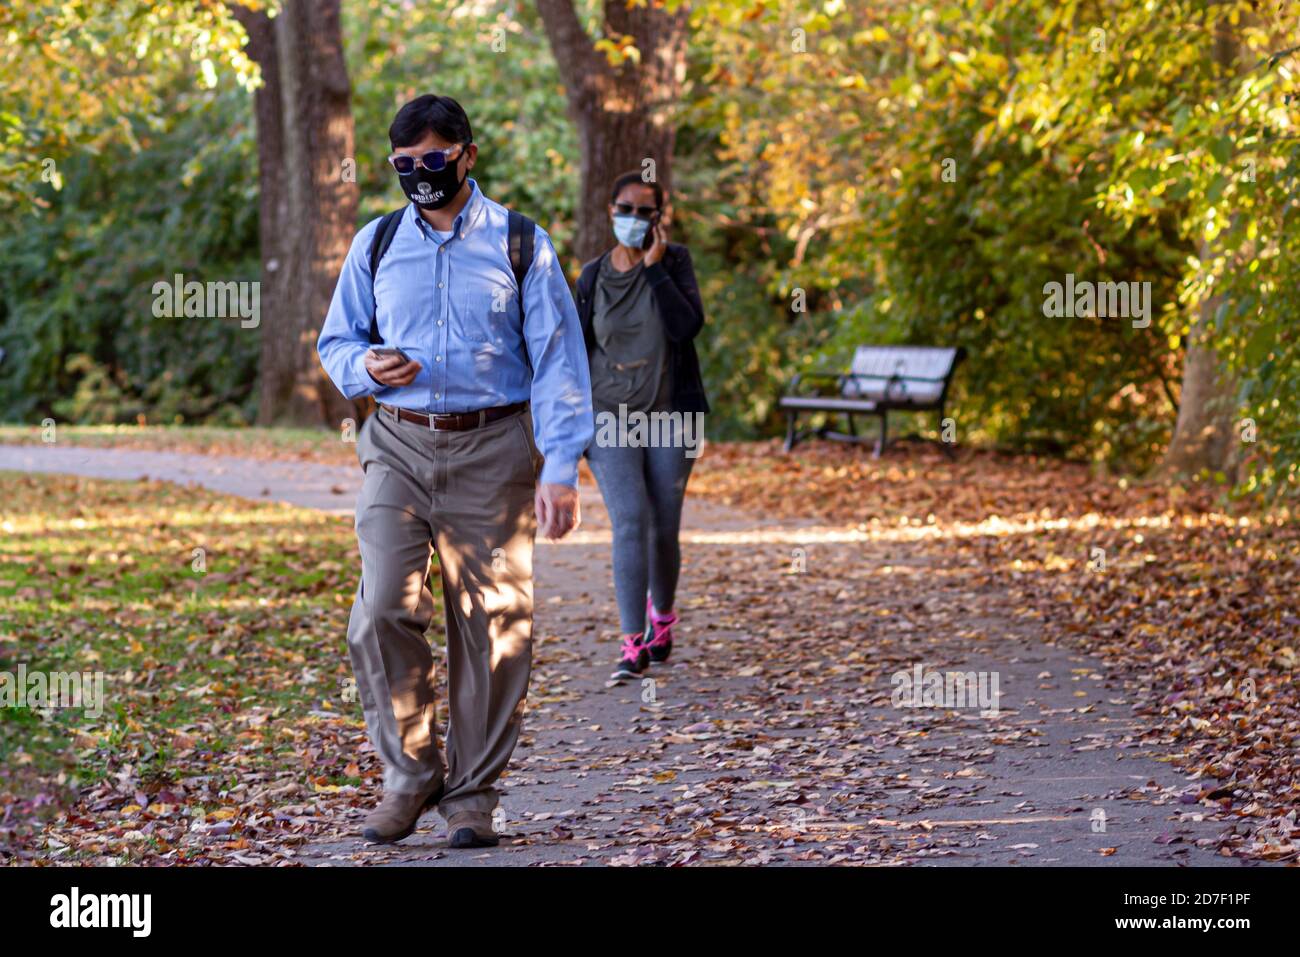 Frederick, MD, USA 10/14/2020: An Indian young professional man and an African American woman is seen walking in Baker park with face masks due to COV Stock Photo